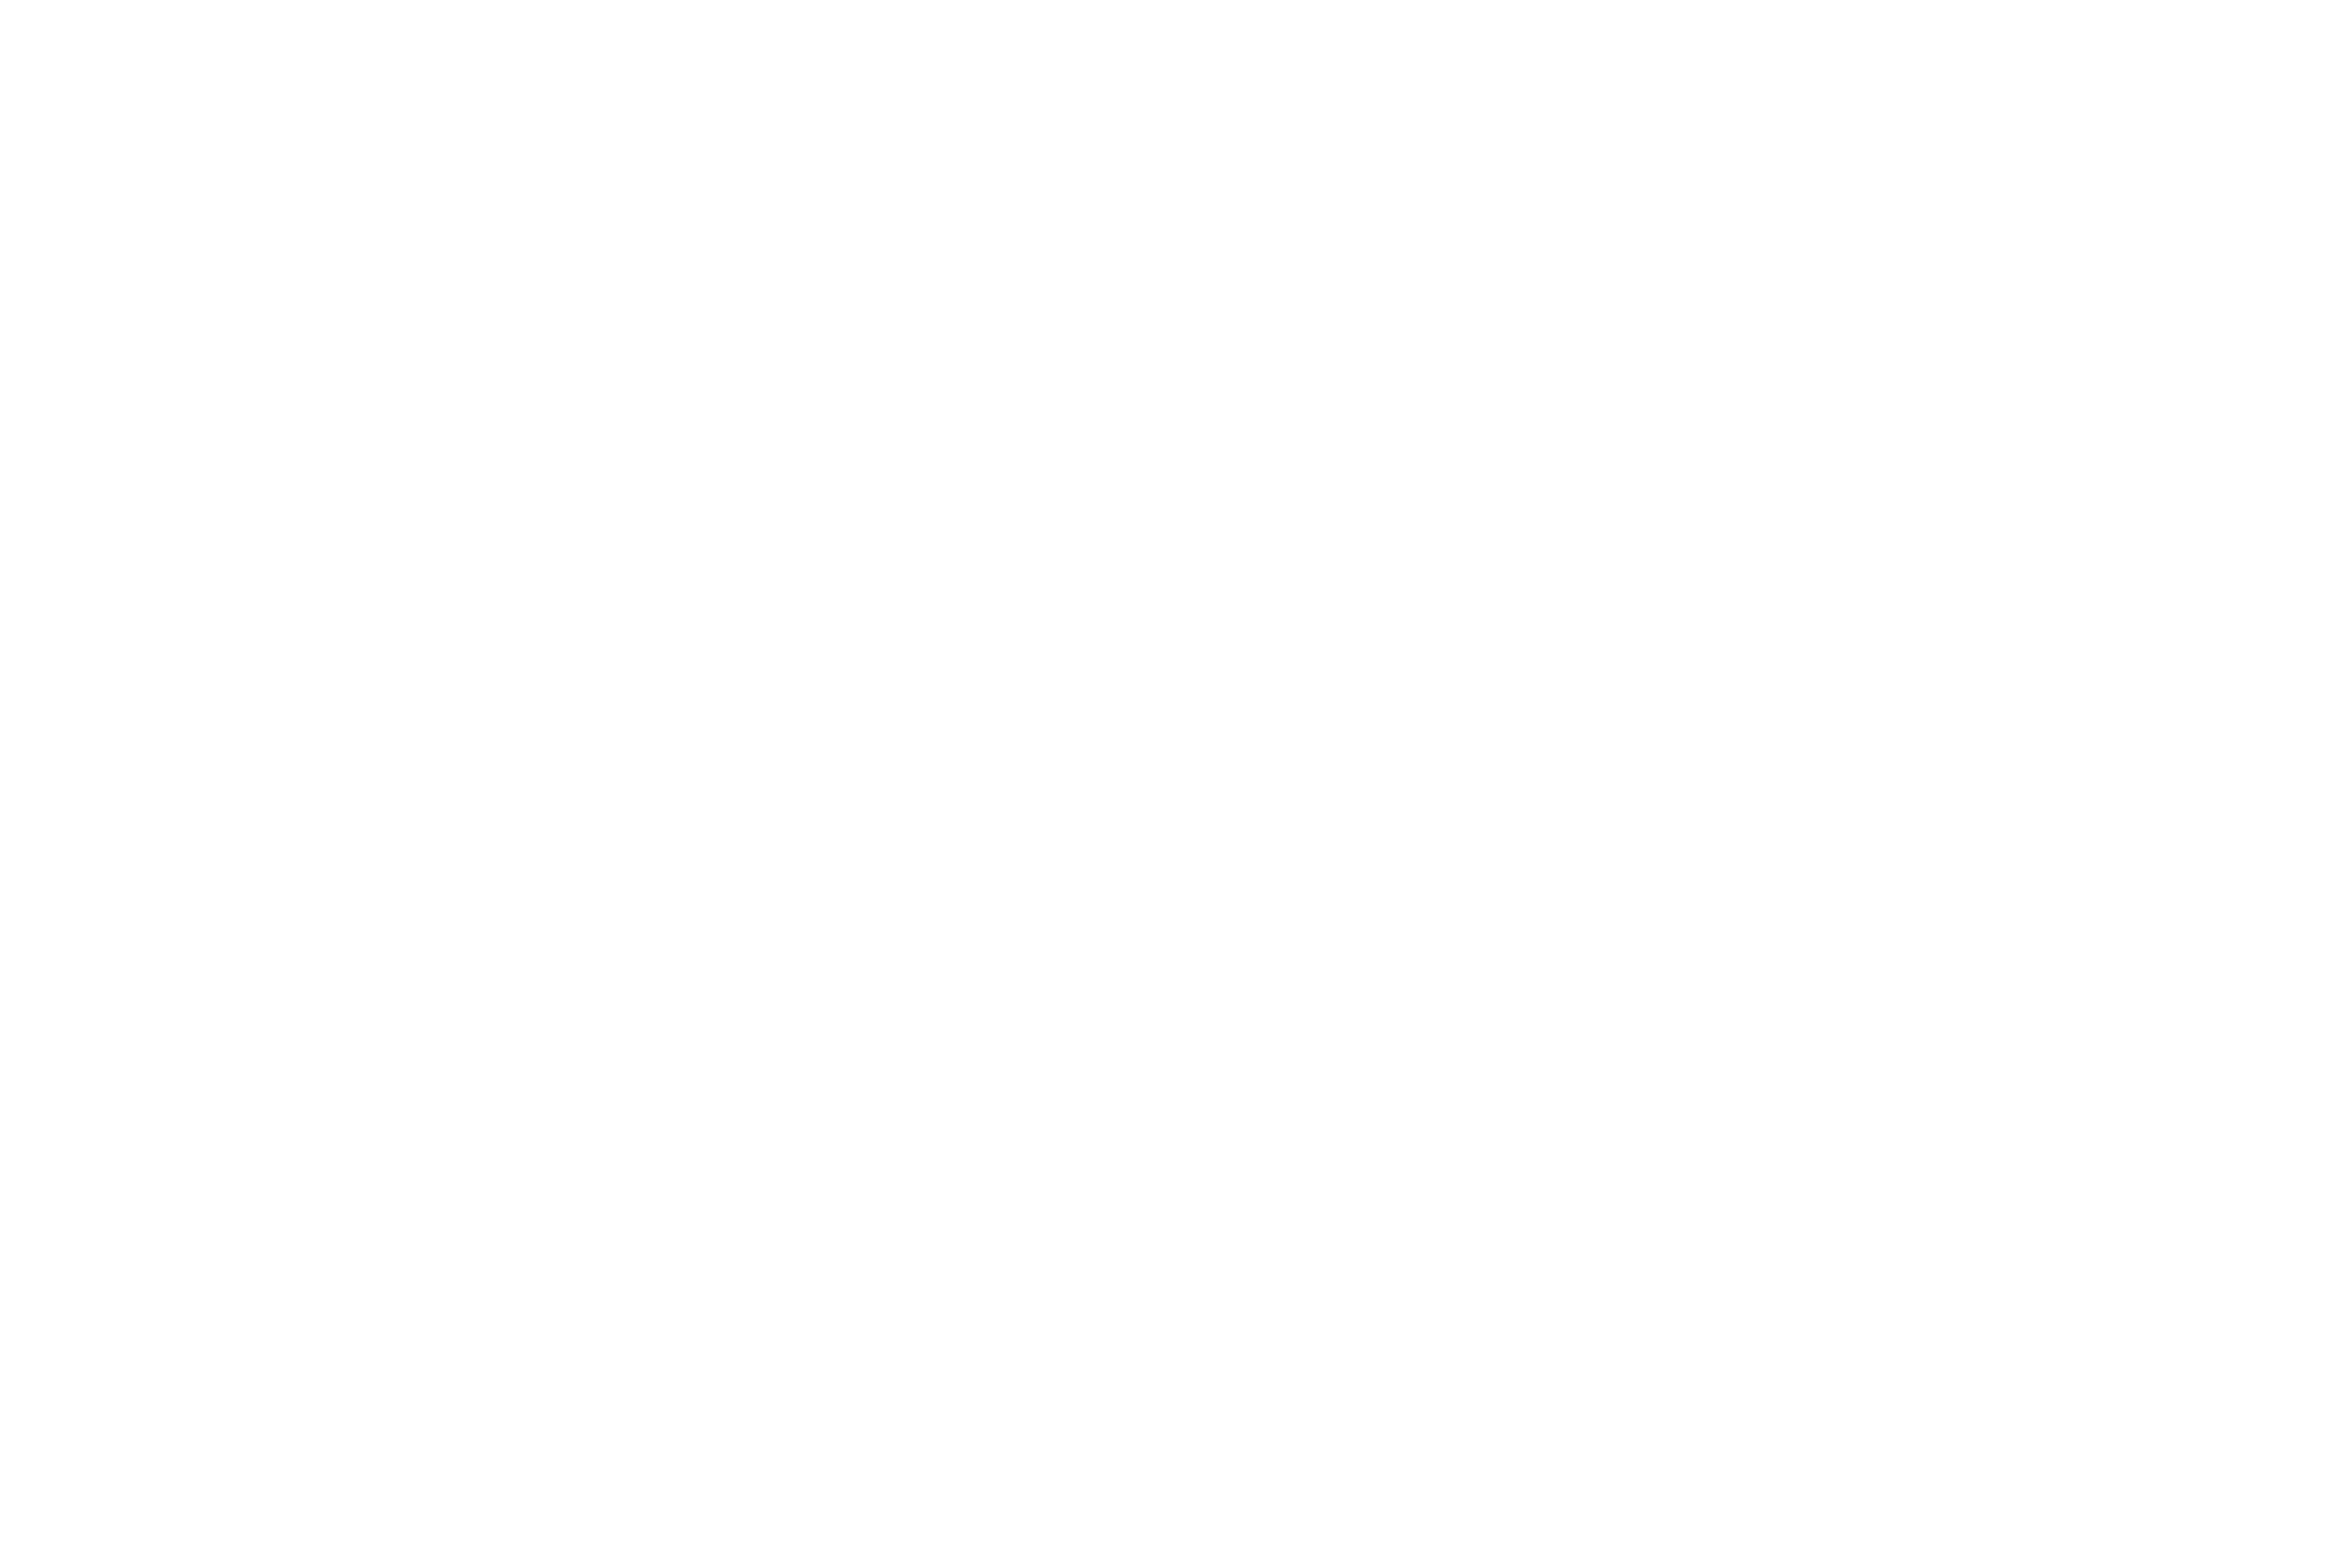 BOOTS & HEARTS